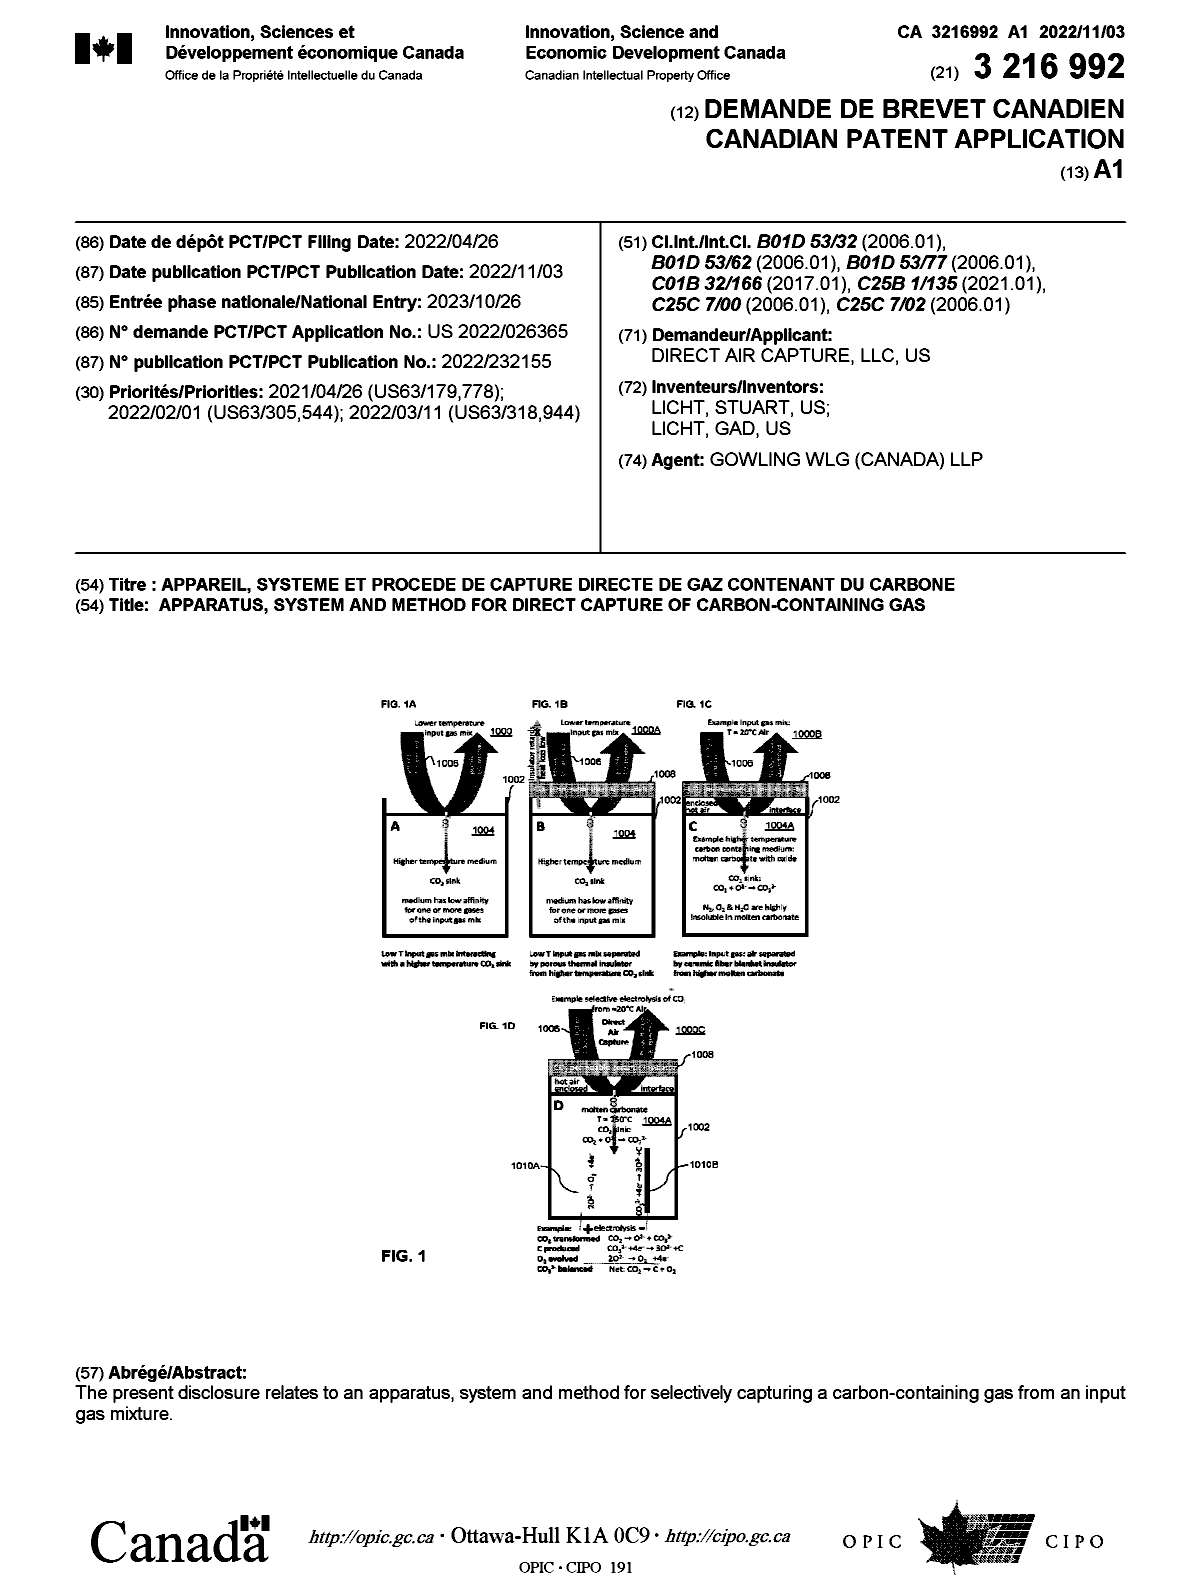 Canadian Patent Document 3216992. Cover Page 20231123. Image 1 of 1